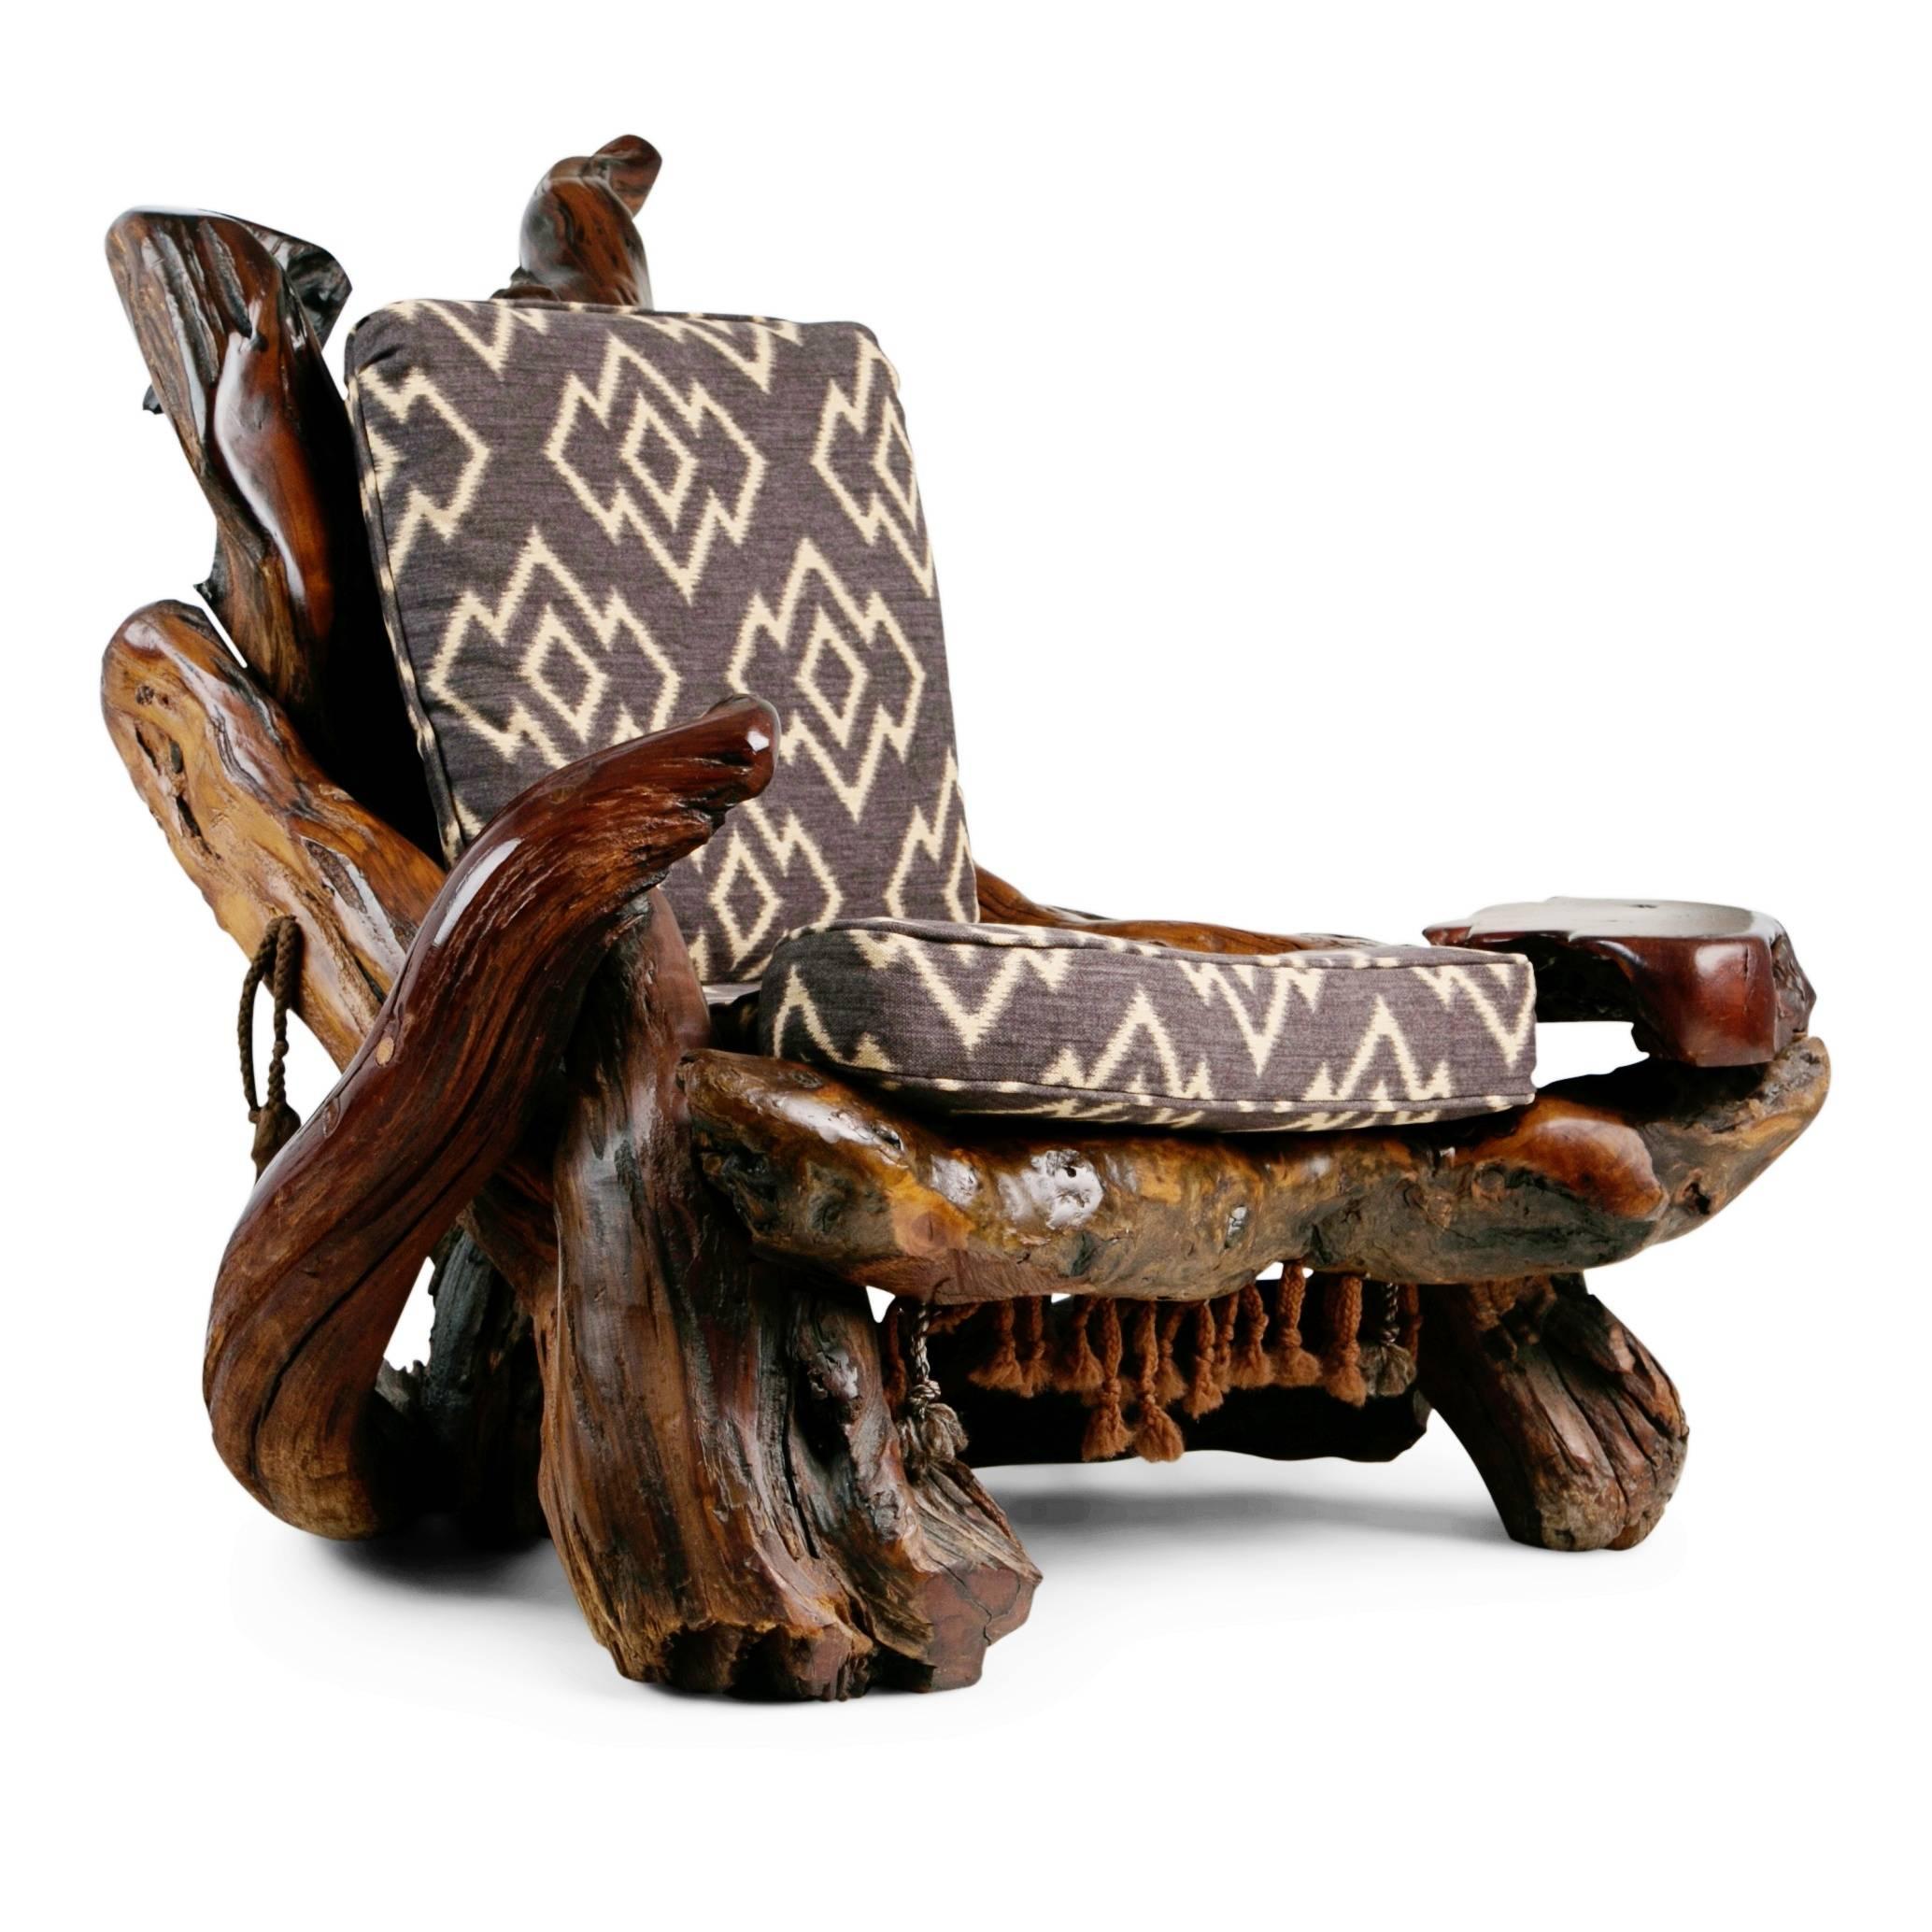 Extraordinary artisan sculptural root wood armchair handcrafted from naturally free-formed burl redwood which has been polished and worked into an impressive lounge chair, in the style of California sculptor Daryl Stokes in the 1970s. The twisted